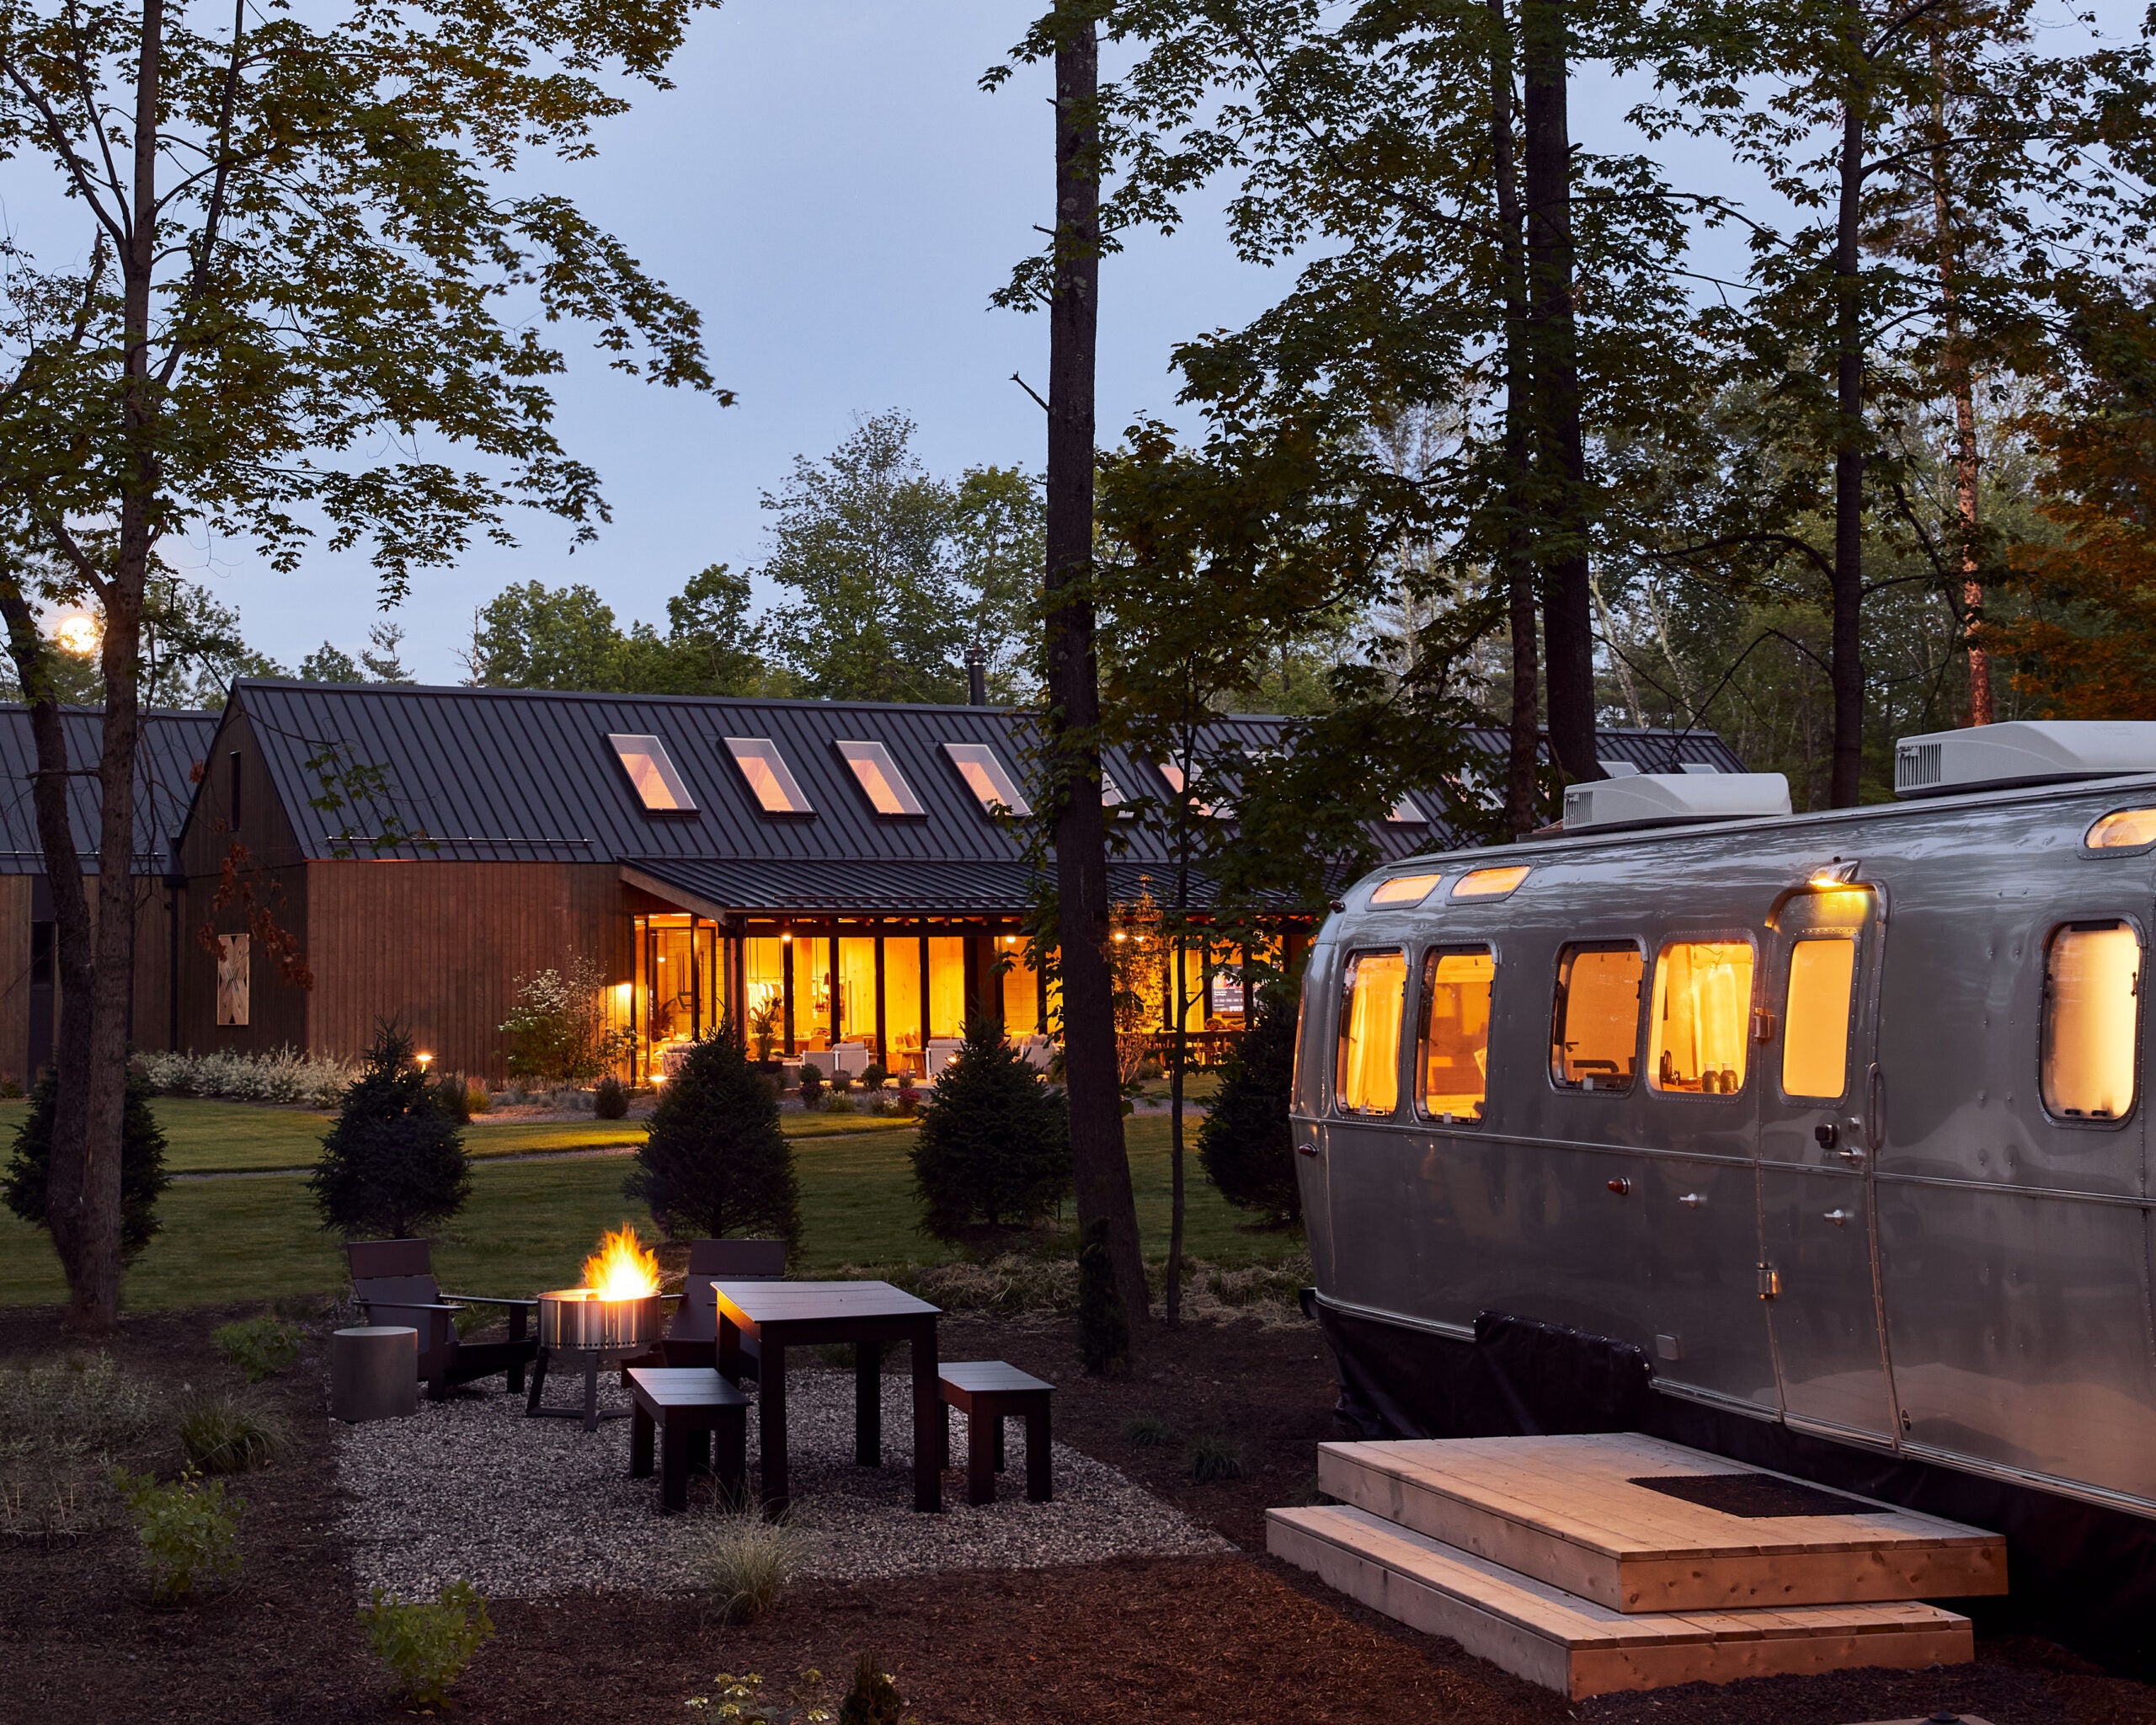 Hilton makes a play for the great outdoors with new AutoCamp partnership - The Points Guy